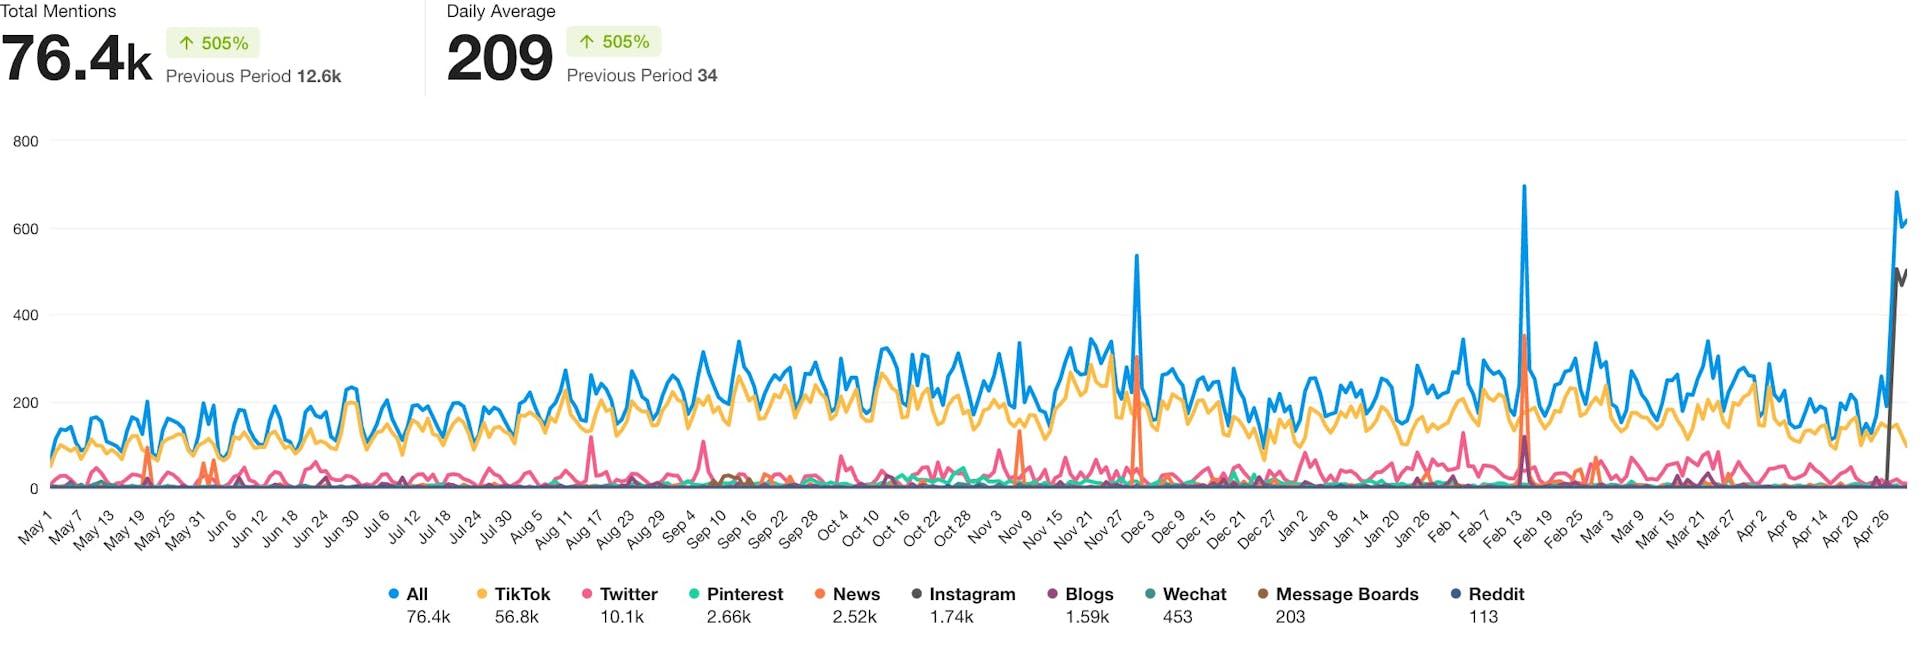 A chart showing mentions of #tiktokmademebuyit over time by source, with TikTok having the highest volume of mentions.